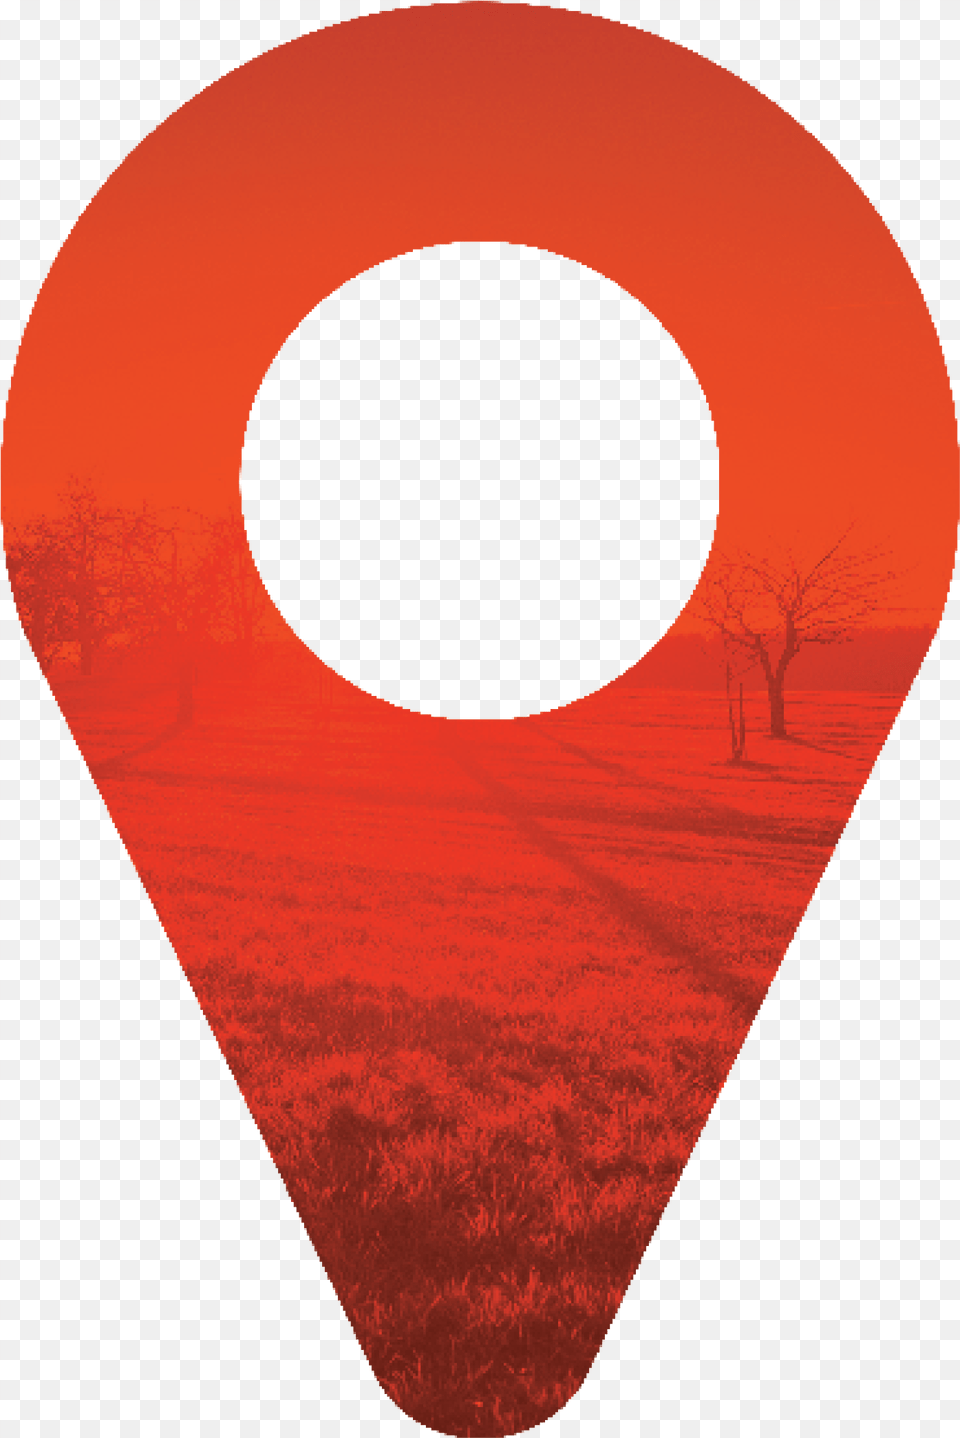 Location Point Icon, Smoke Pipe Free Transparent Png